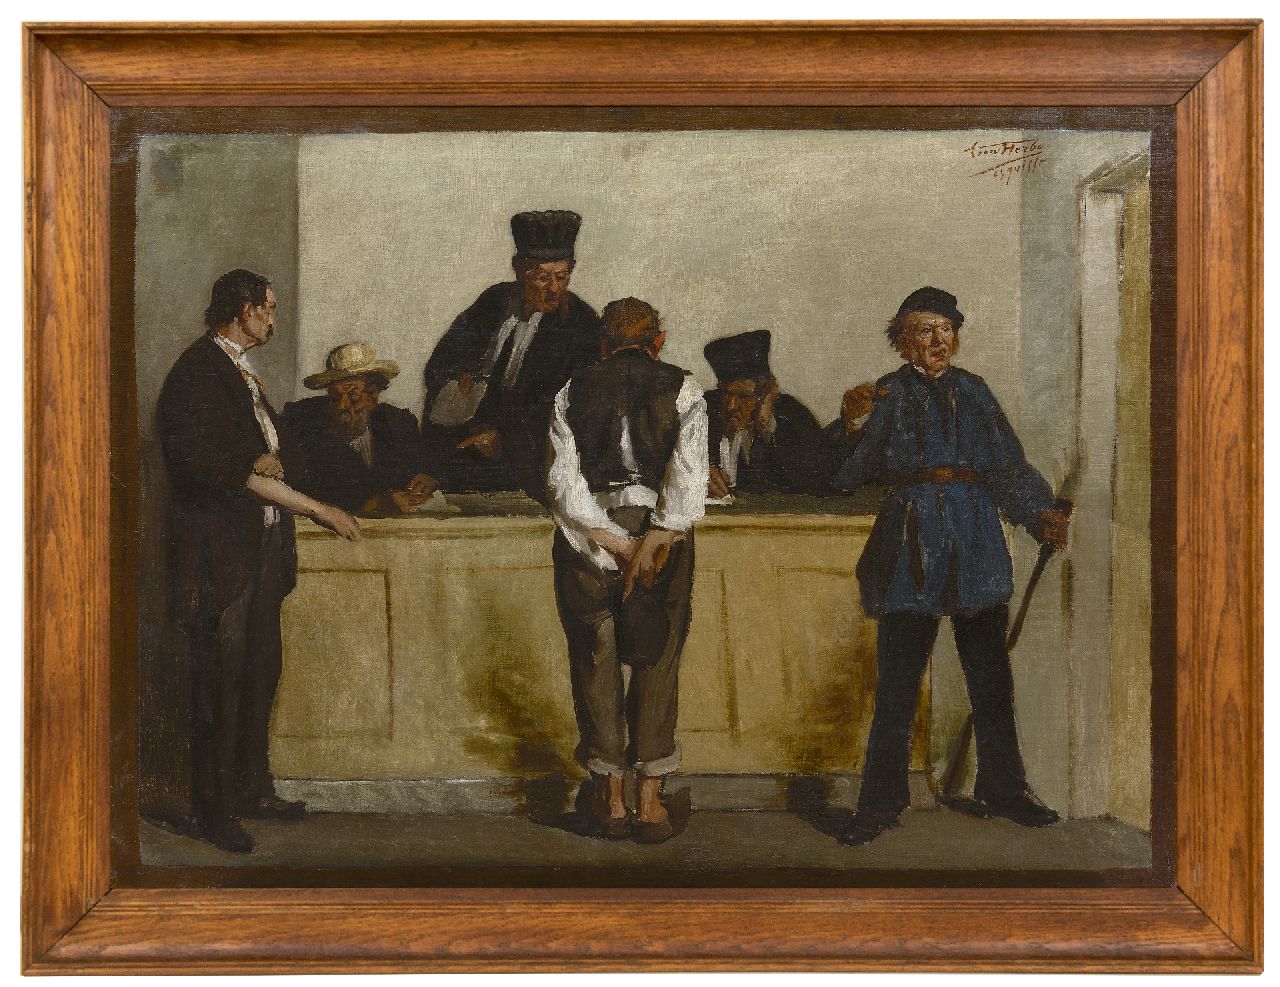 Herbo L.  | Léon Herbo | Paintings offered for sale | The trial, oil on canvas 56.3 x 76.1 cm, signed u.r.